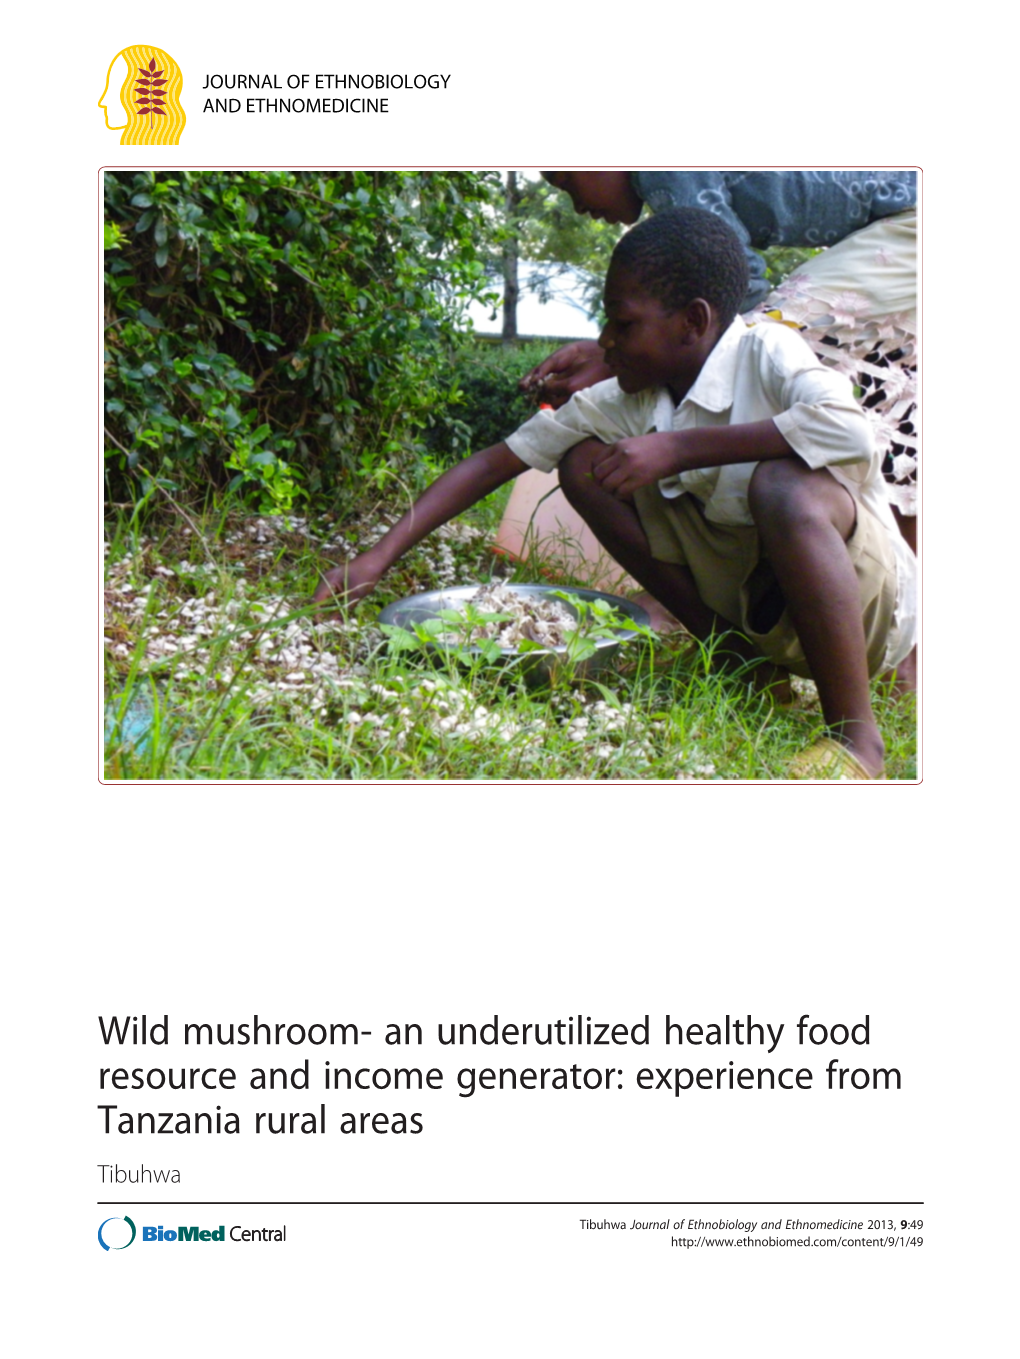 Wild Mushroom- an Underutilized Healthy Food Resource and Income Generator: Experience from Tanzania Rural Areas Tibuhwa